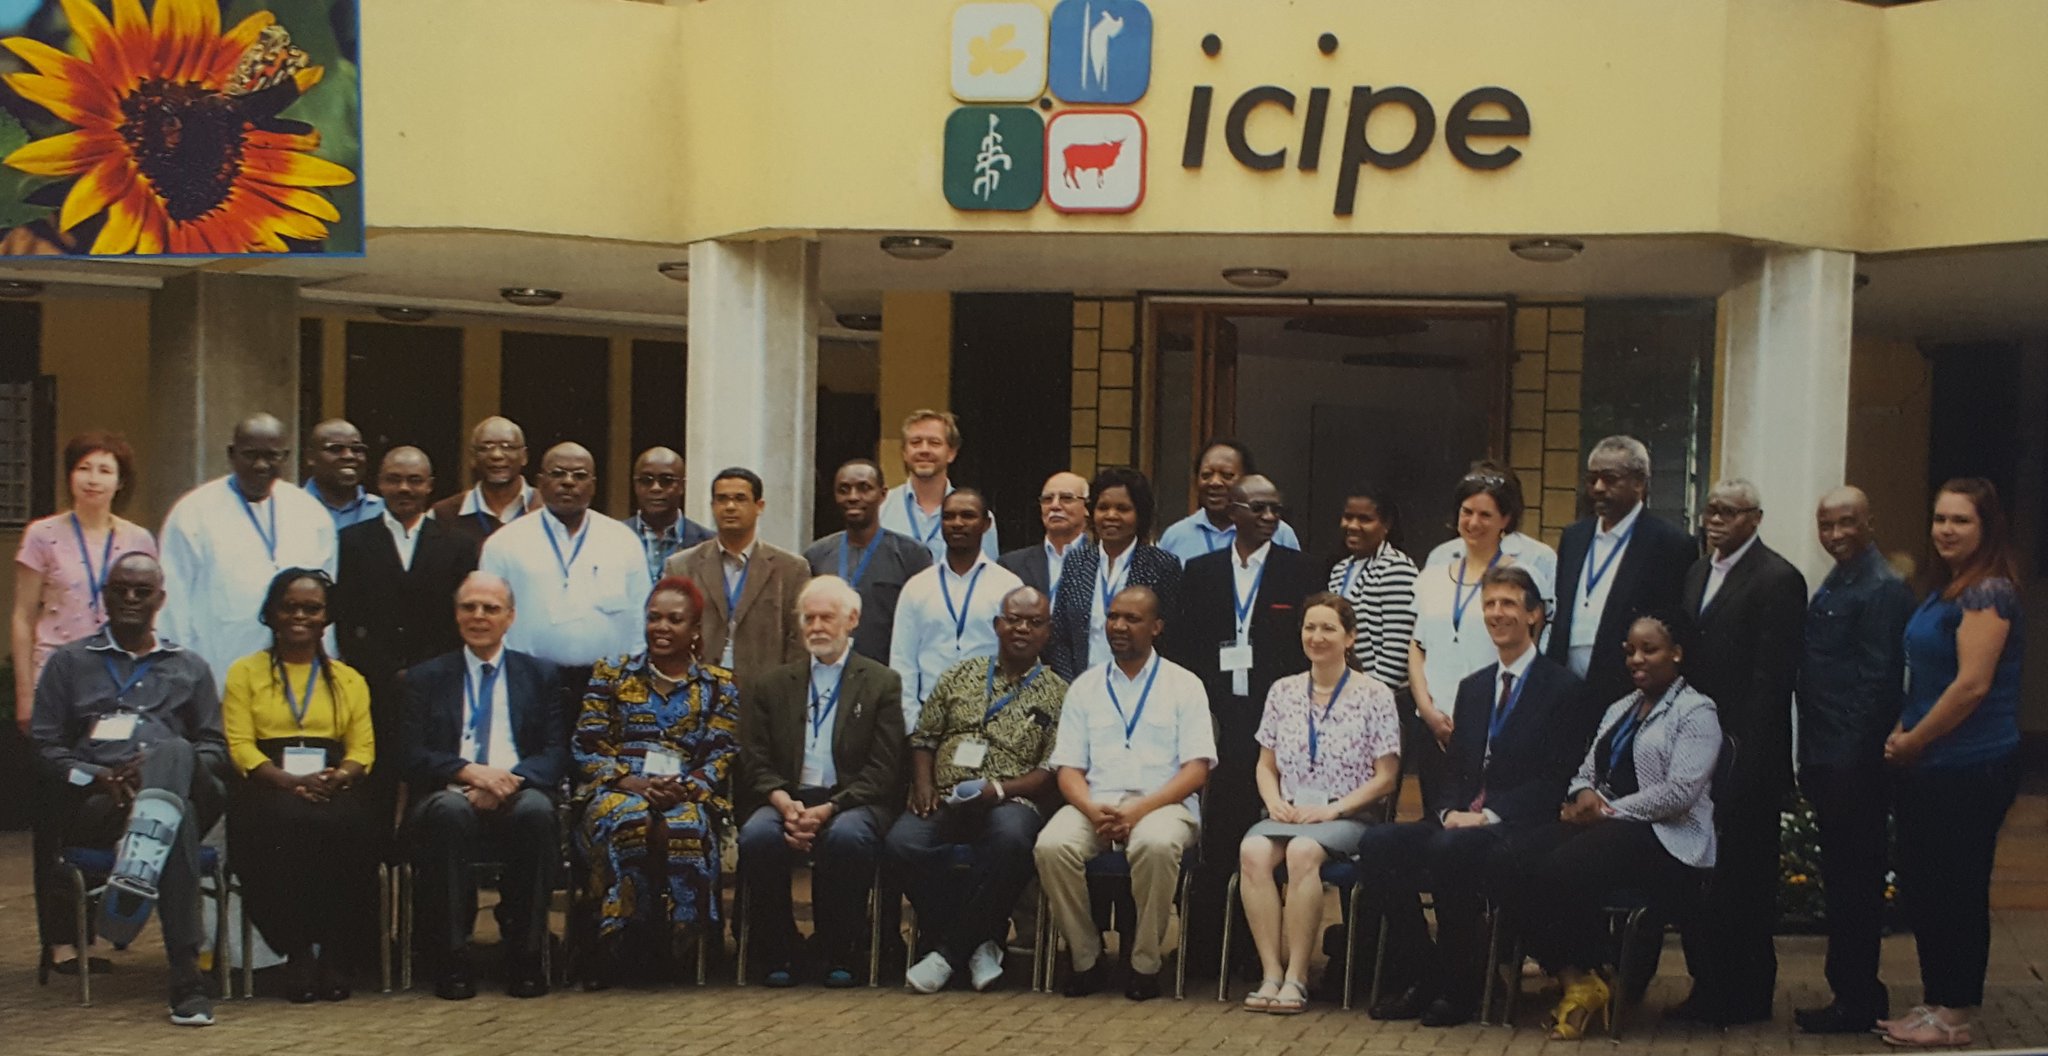 Group photo at ICIPE